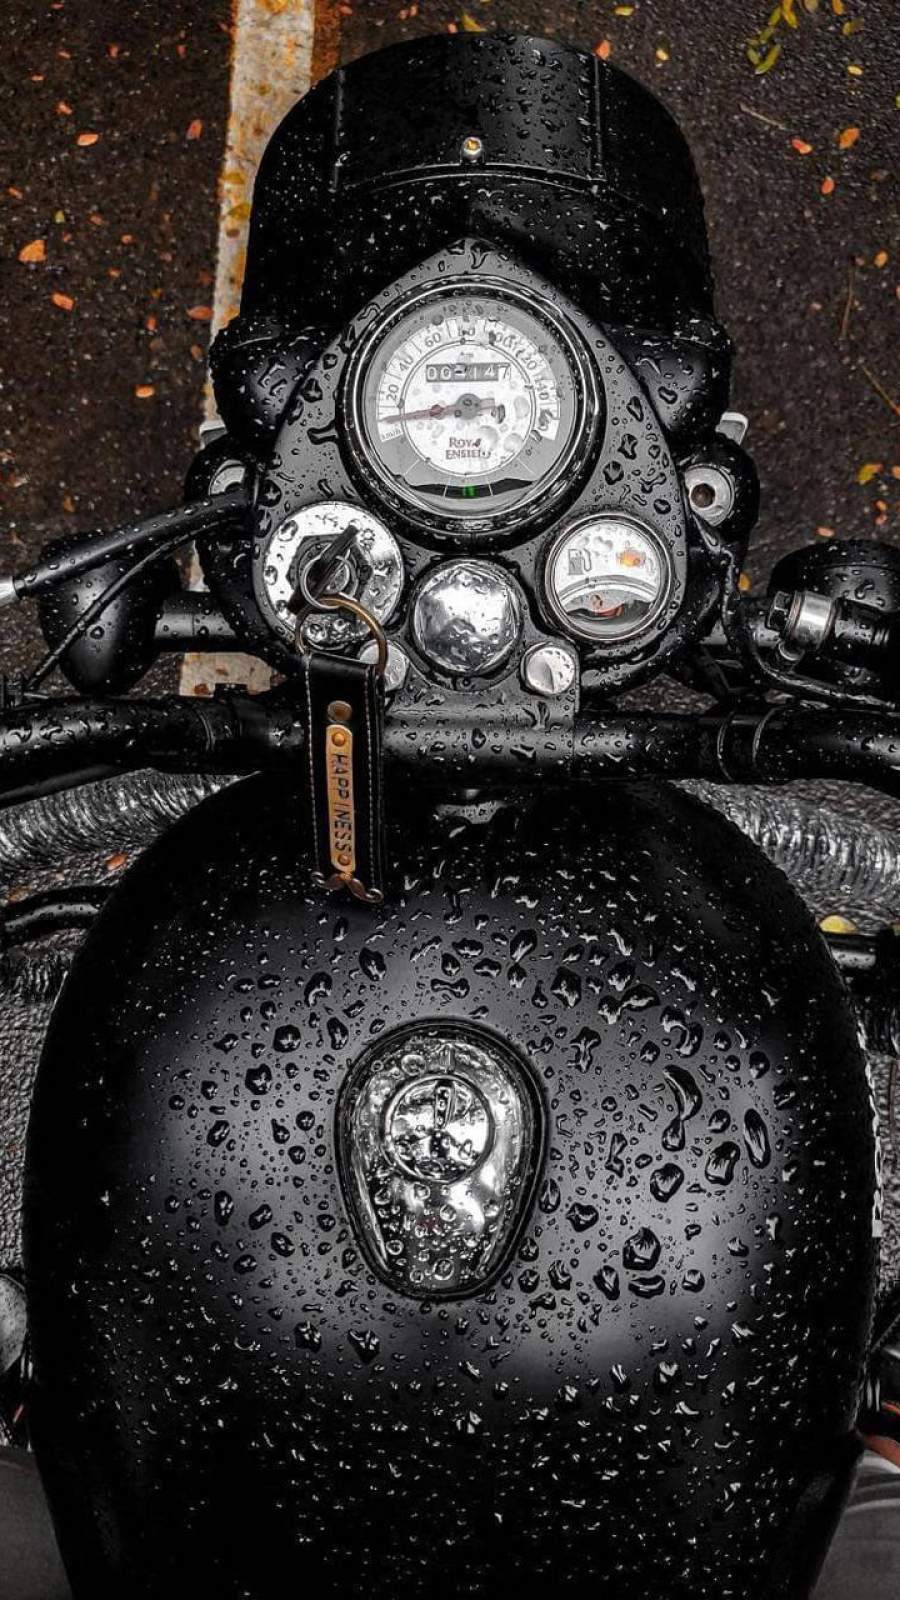 Royal Enfield Bullet Stealth Black - IPhone Wallpapers : iPhone Wallpapers